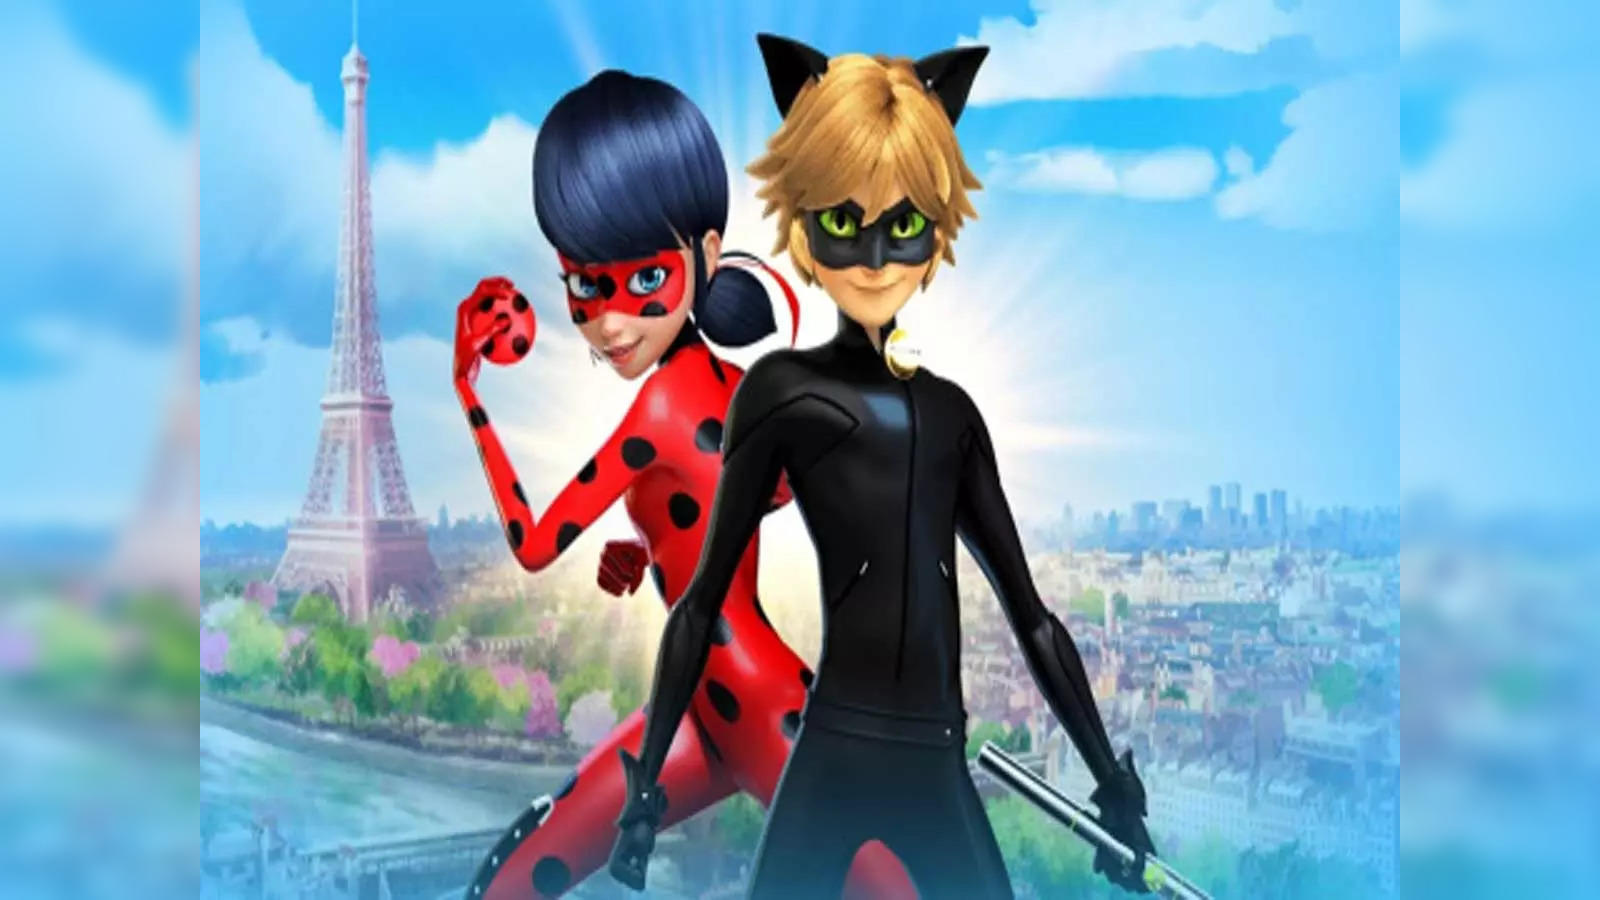 part 4!! last part! finally finished making the miraculous box